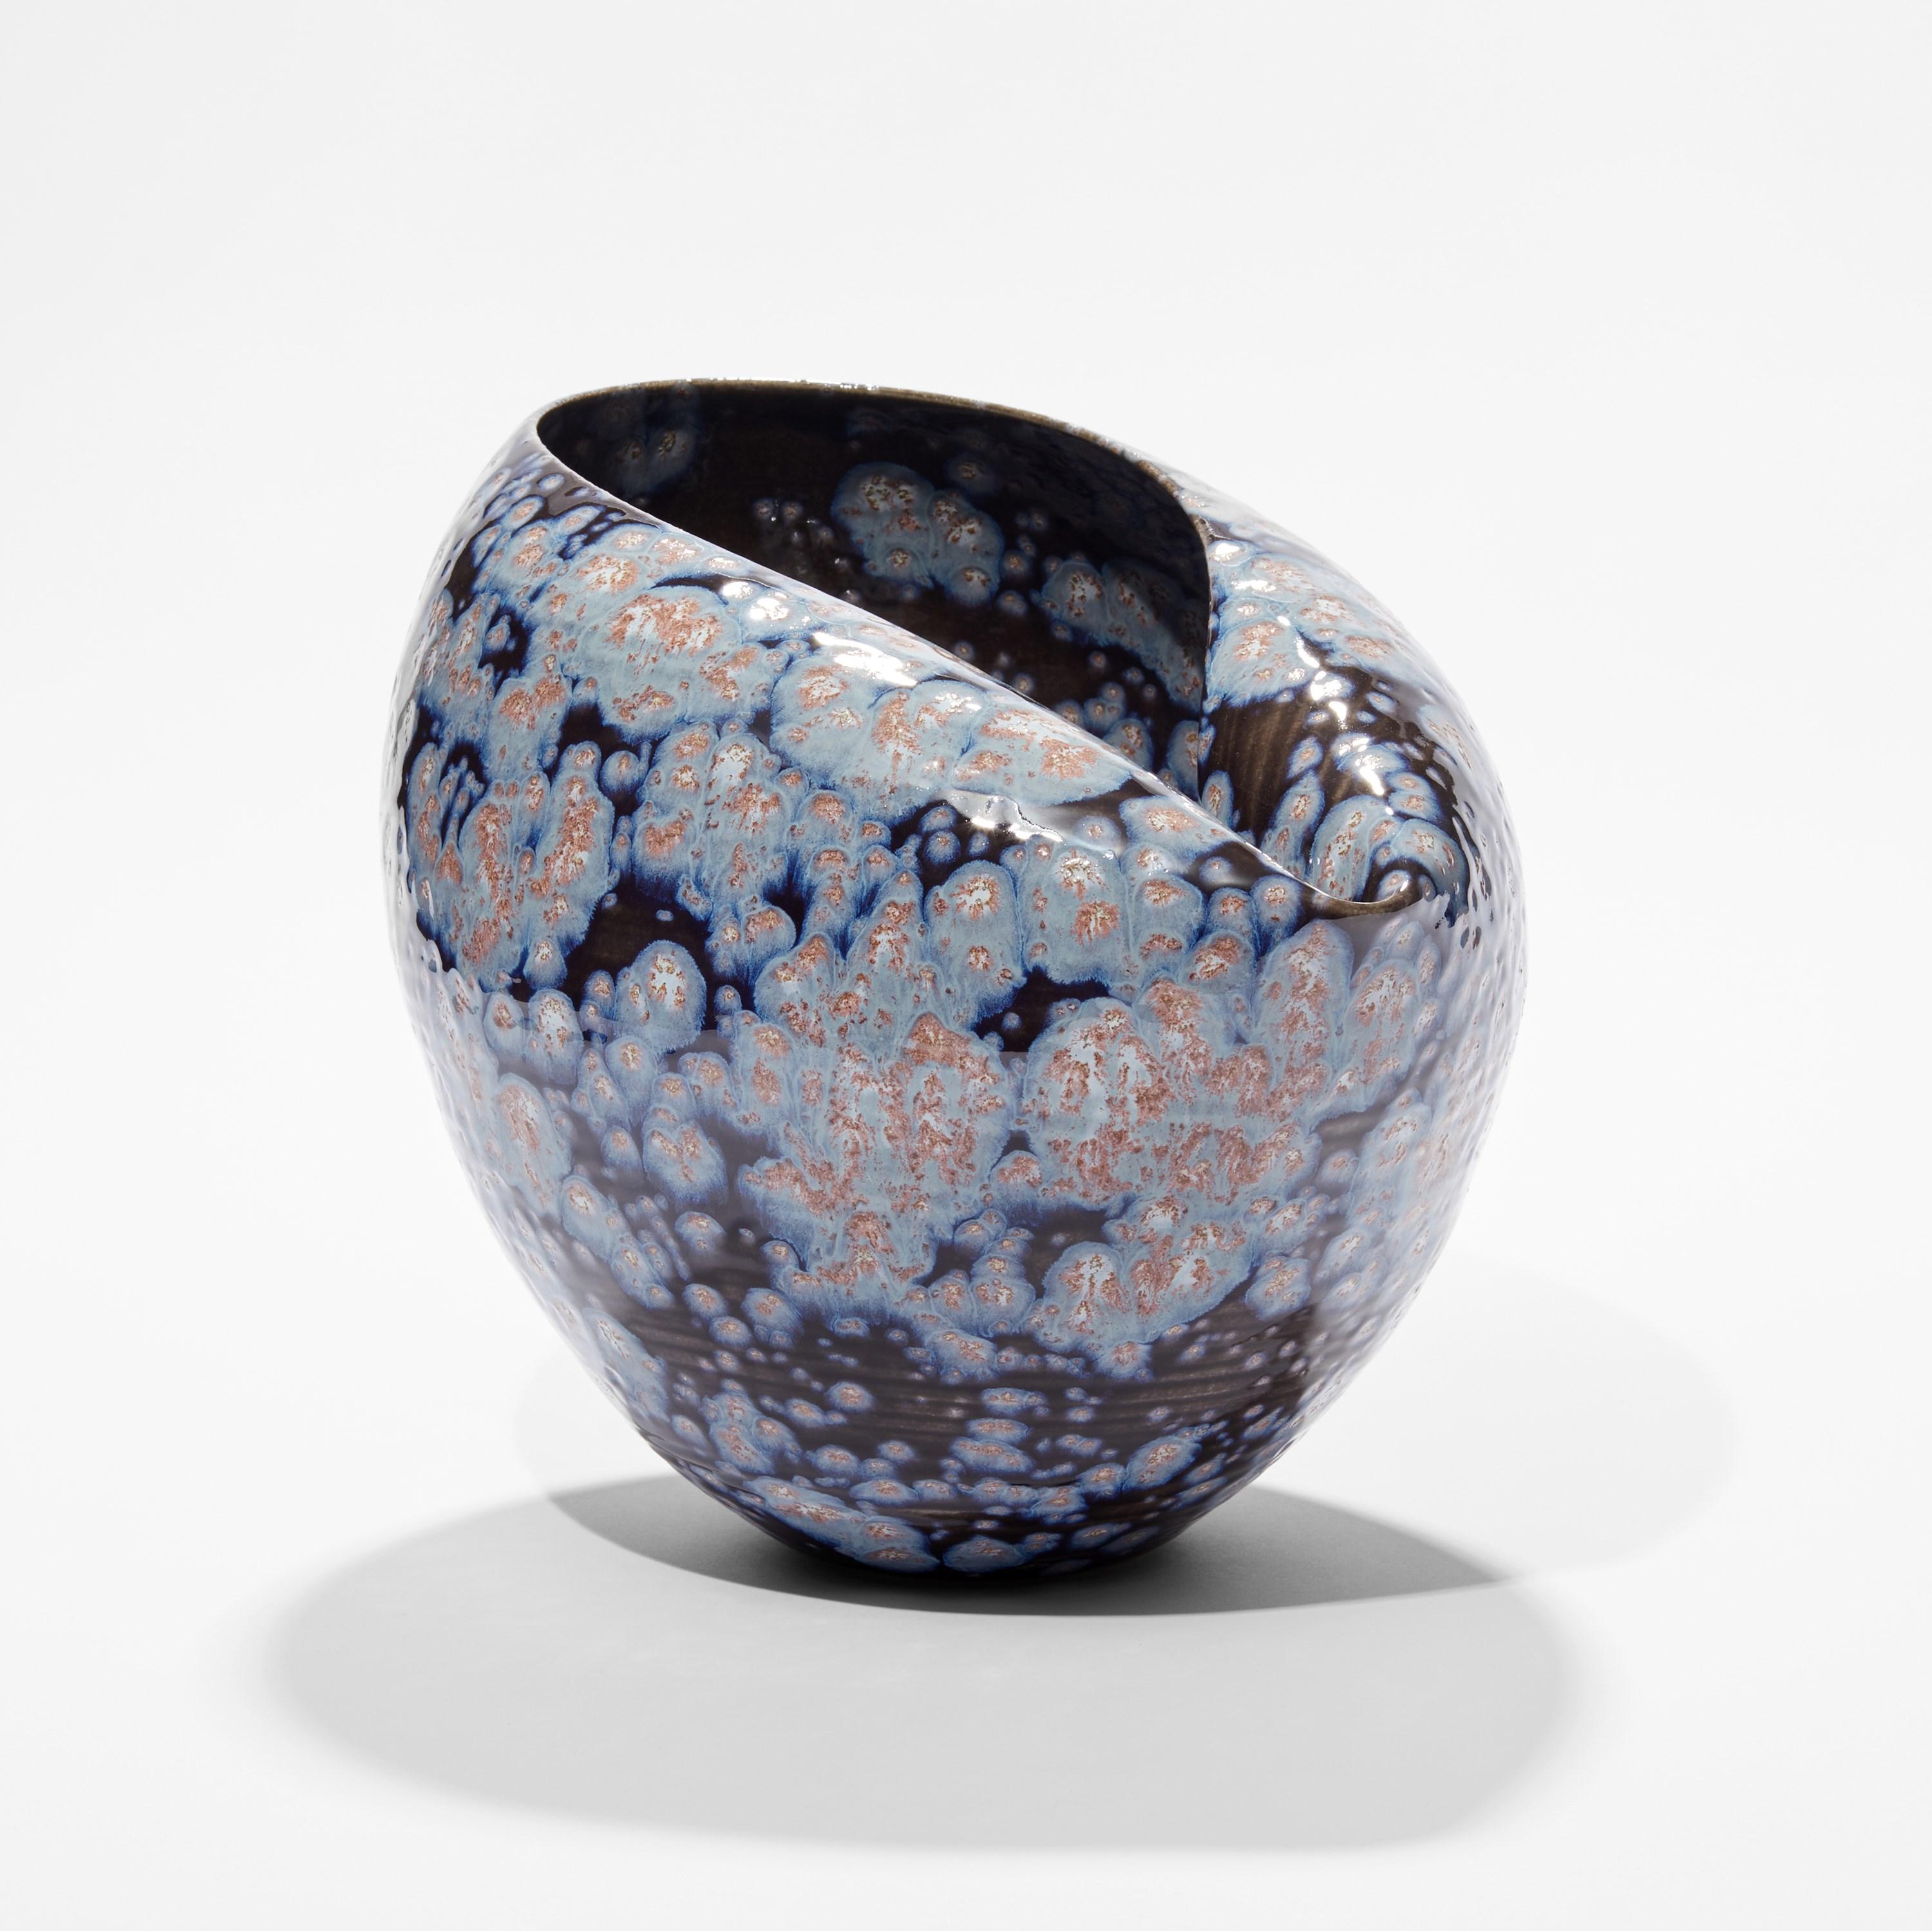 ‘Oval Form in Galactic Blue No 88’ is a unique sculptural vessel by the British artist, Nicholas Arroyave-Portela.

Nicholas Arroyave-Portela’s professional ceramic practise began in 1994. After 20 years based in London, he moved and set up his